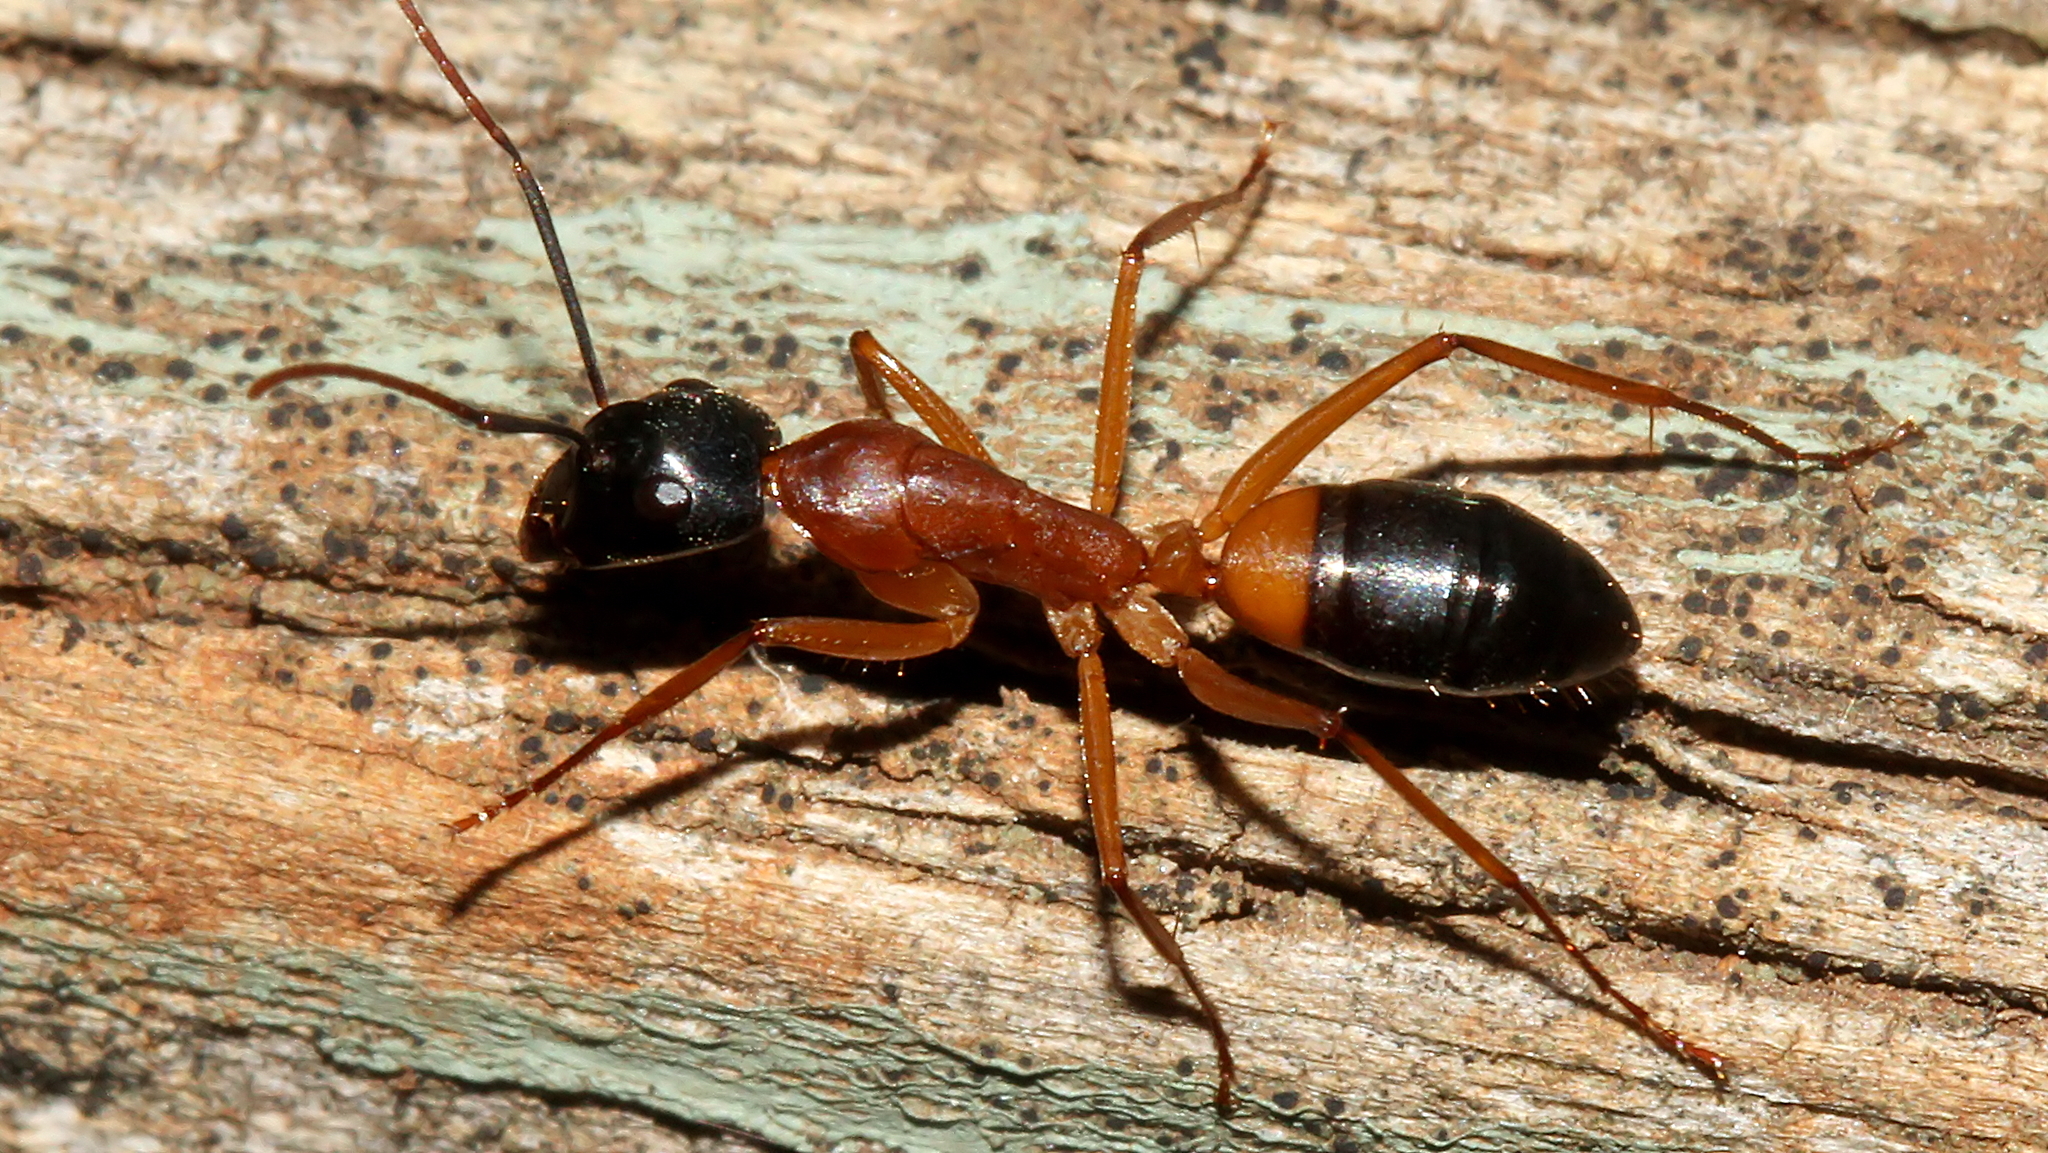  Sugar Ant - they are dominant in their ant world and often attack and defeat other ant colonies.